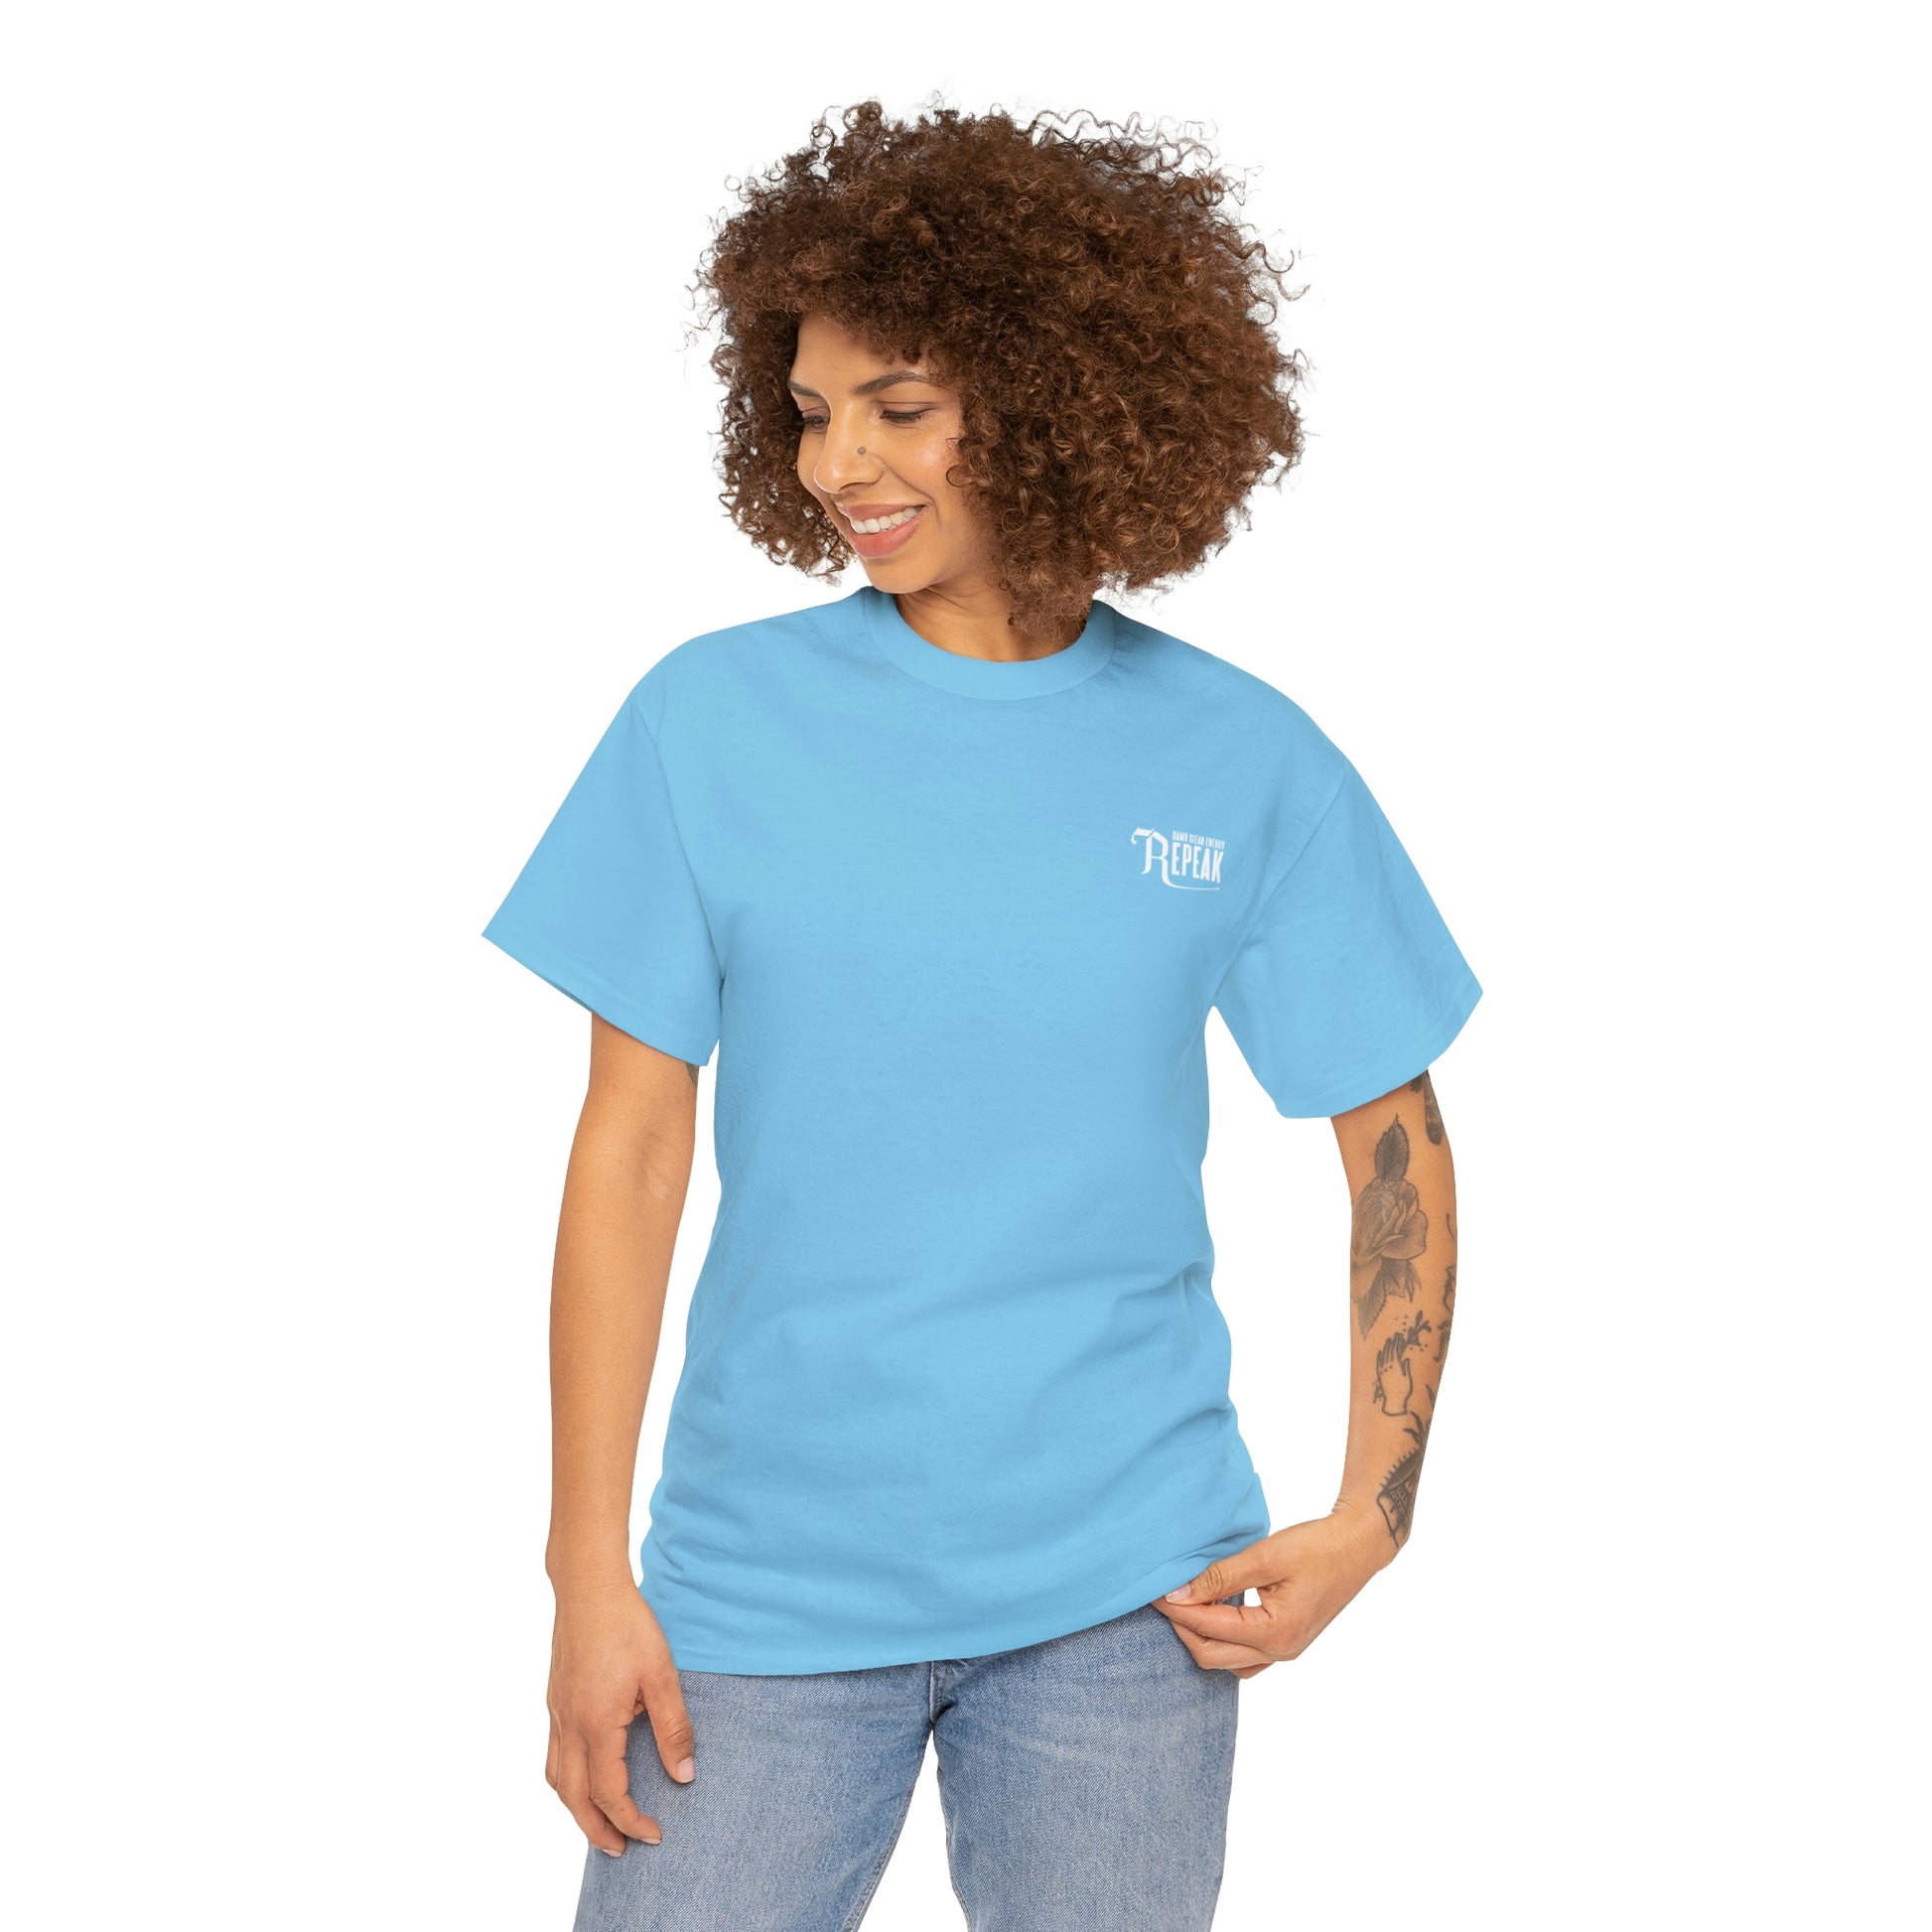 repeak energy drink blue t-shirt, front side with female model